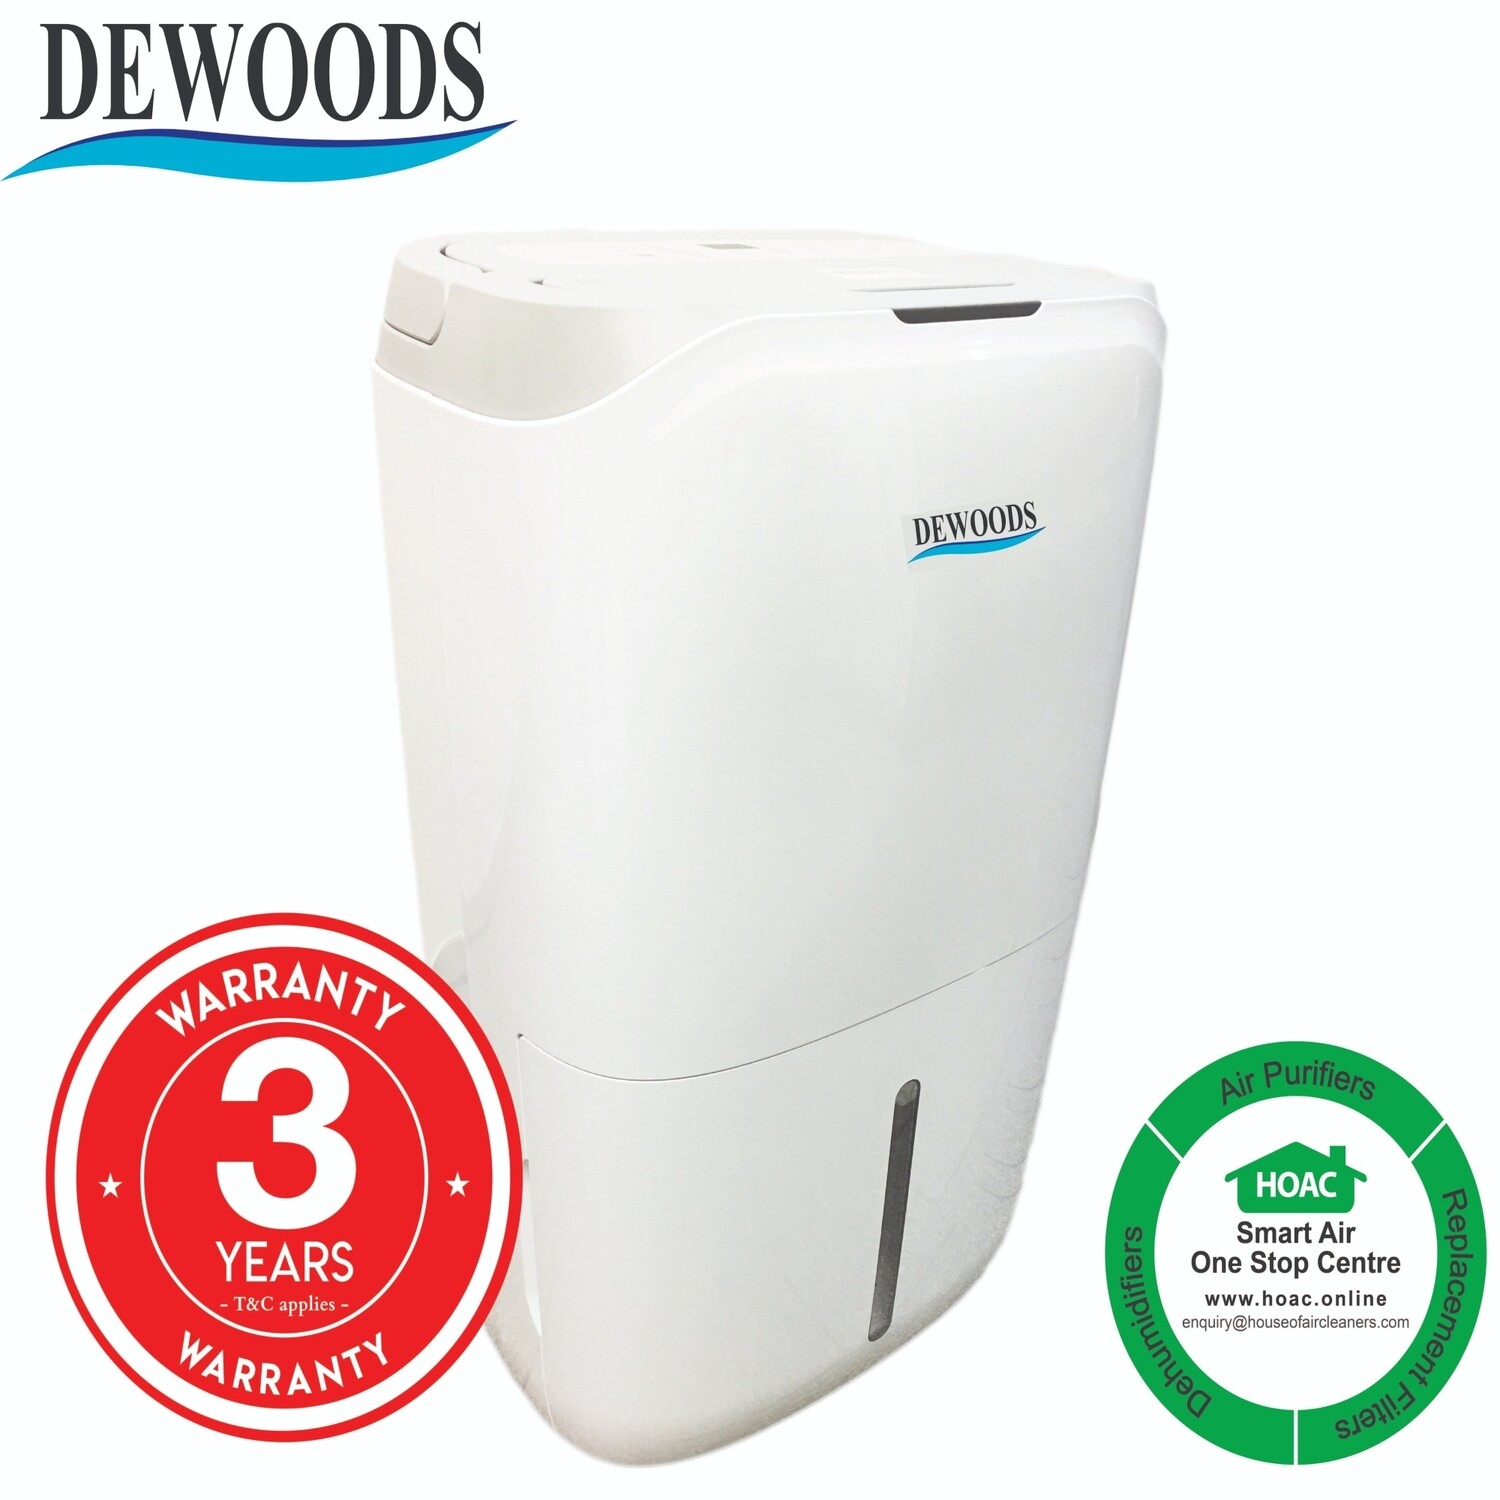 DEWOODS Dehumidifier MDH-20A (20 Litres) With 3 YEARS WARRANTY